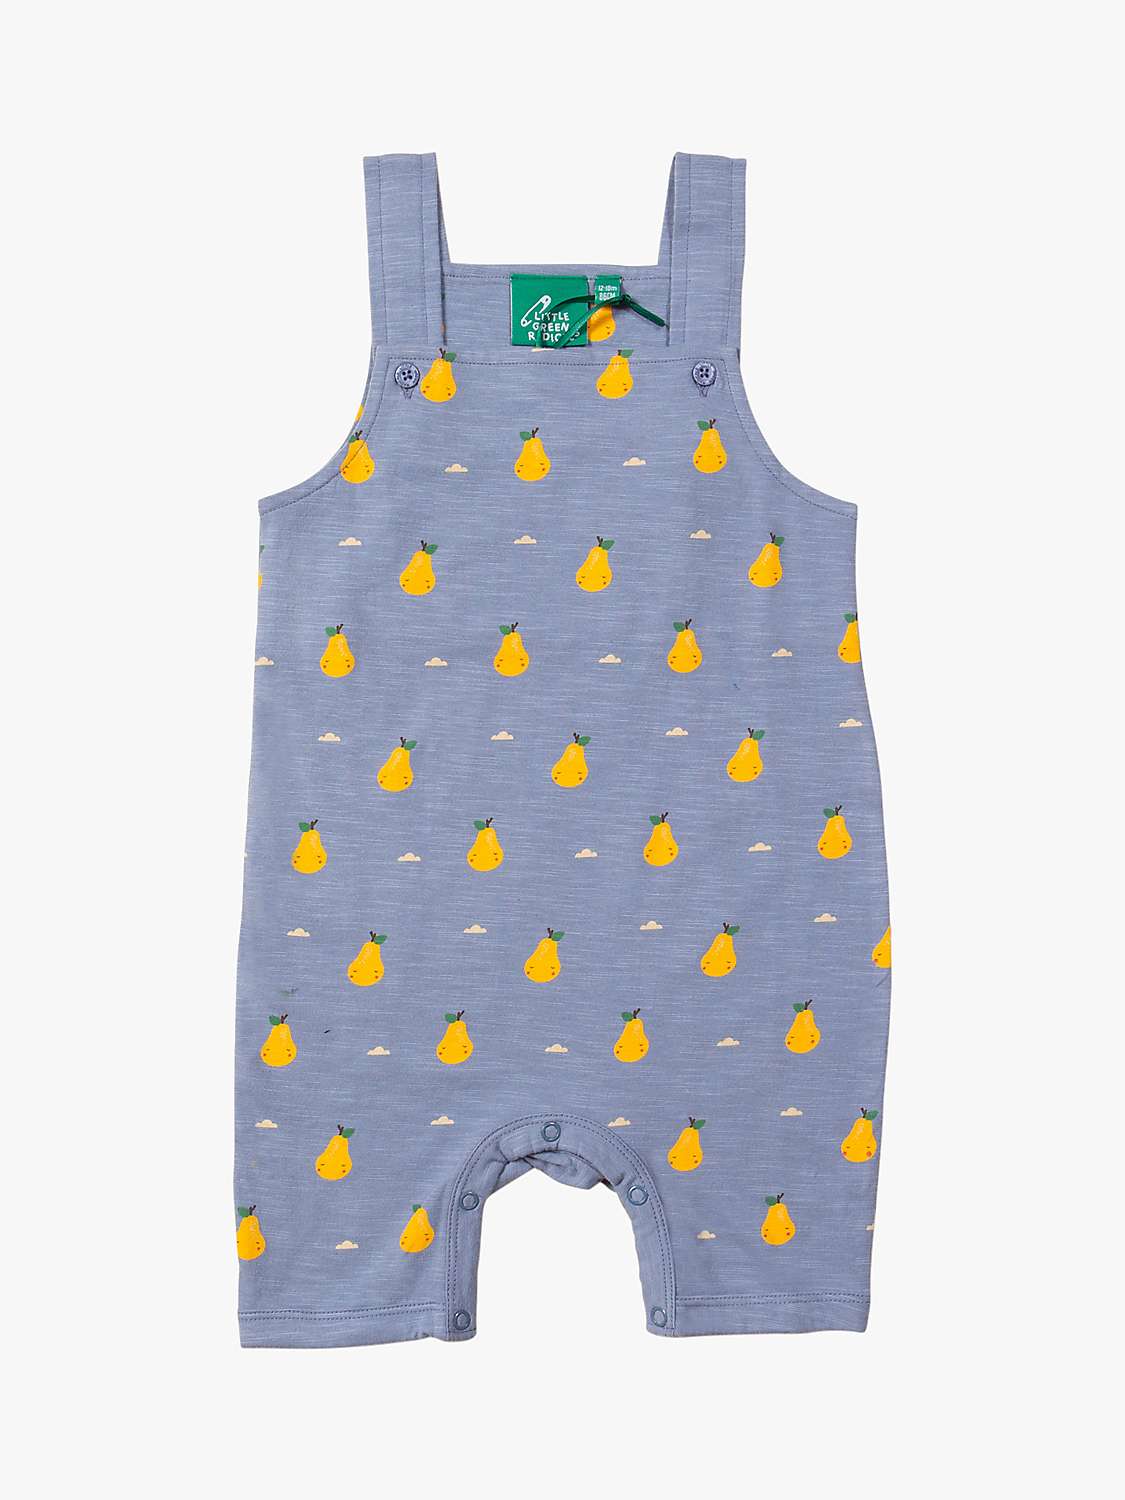 Buy Little Green Radicals Baby Organic Cotton Sunshine Pear Storytime Dungaree Shorts, Blue Online at johnlewis.com